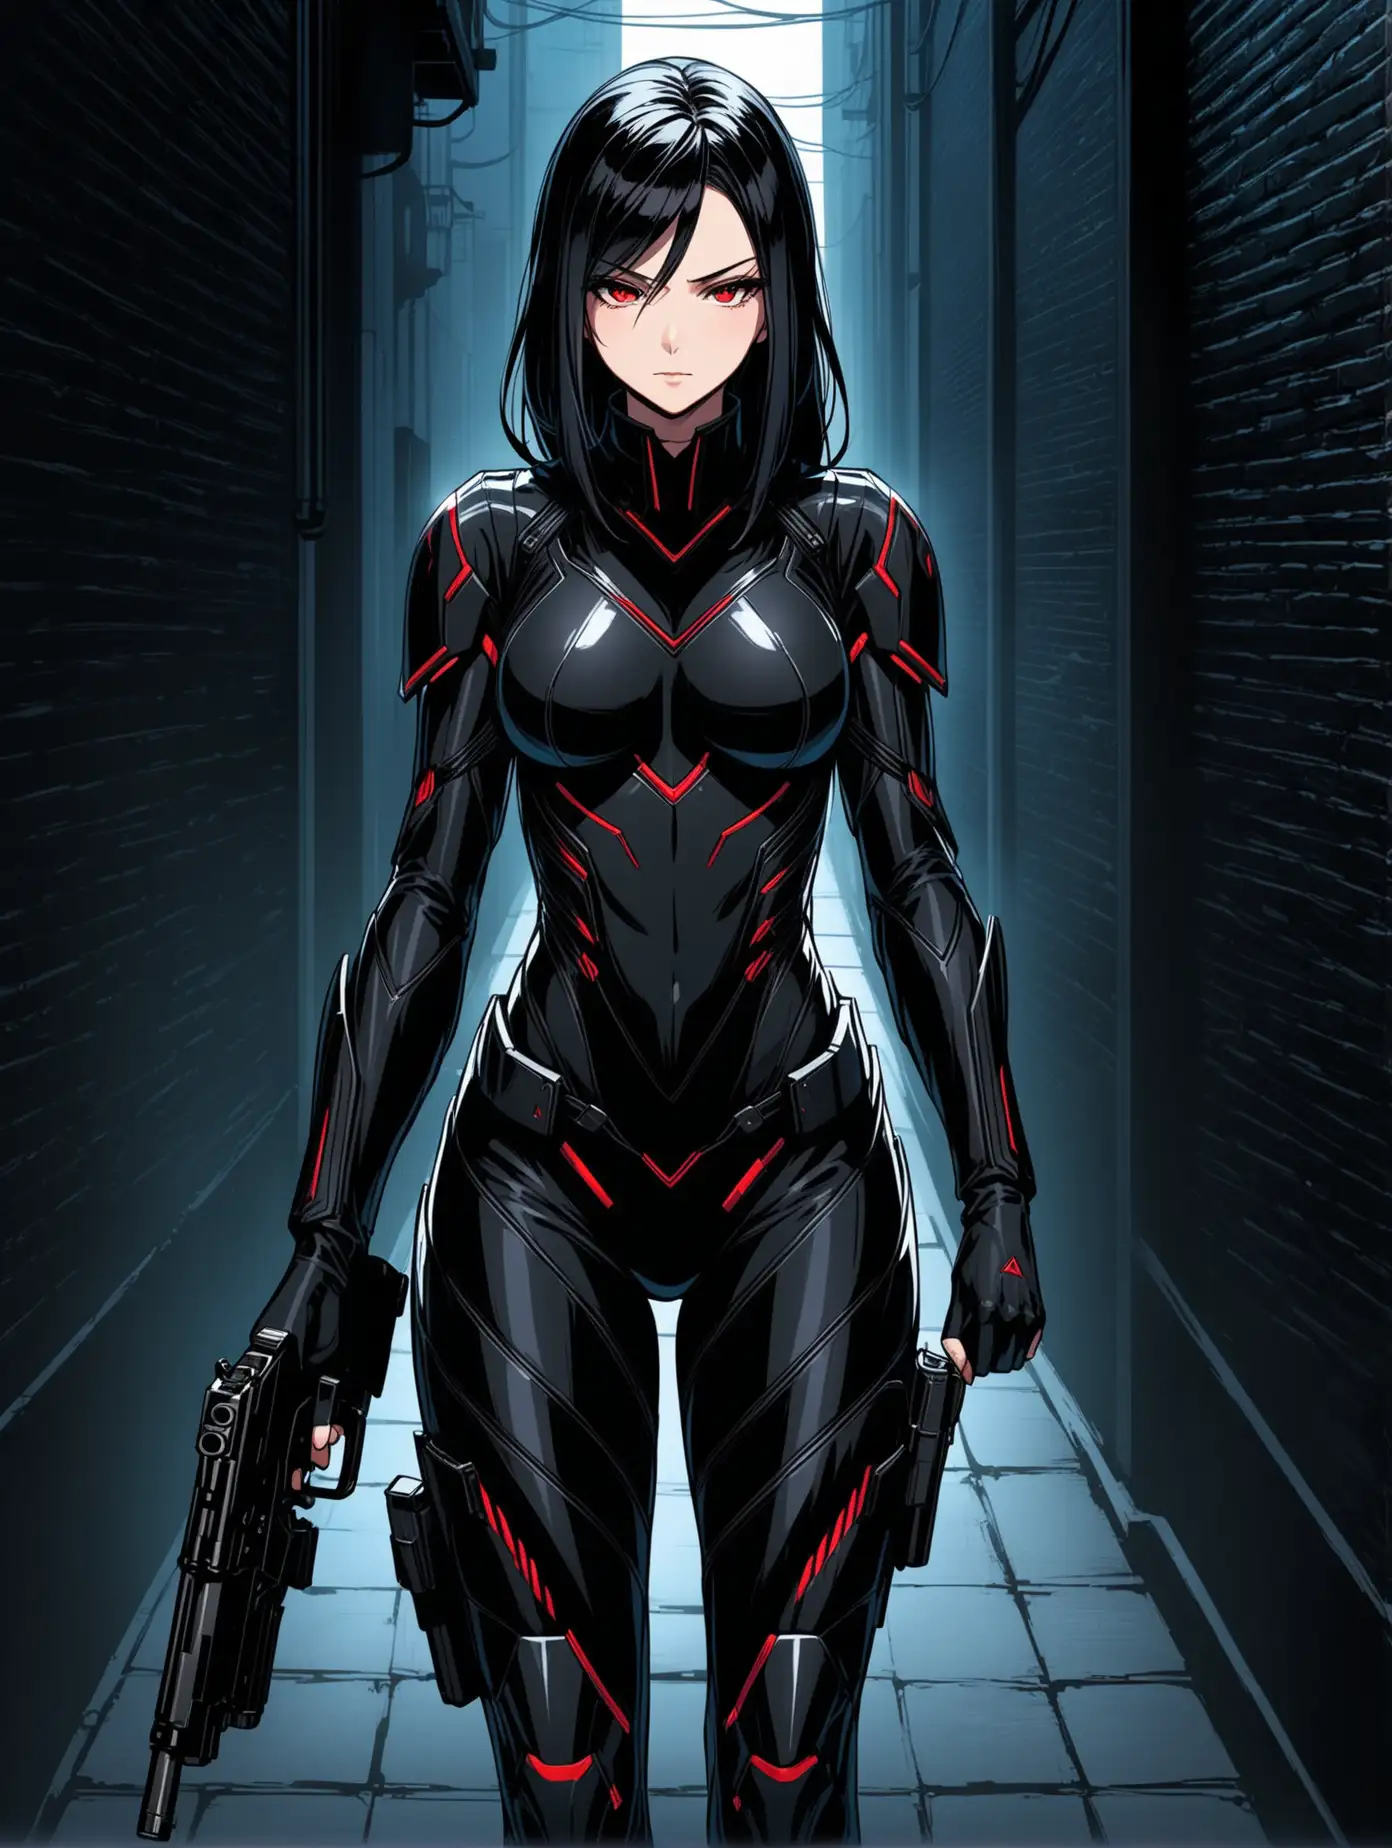 Create an anime-style female assassin character with a sleek black color theme. She has long, flowing black hair and piercing, intense red eyes. Her outfit is a form-fitting black stealth suit, adorned with subtle black armor plating for both protection and agility. She wields black dual pistols with sleek, futuristic designs, each engraved with intricate black patterns that give off a subtle glow in low light. Her stance is confident and poised, one hand gripping a pistol while the other rests casually by her side, ready to draw her weapon at a moment's notice. The background is a dark urban alleyway, with shadows enveloping her and emphasizing her stealthy nature.